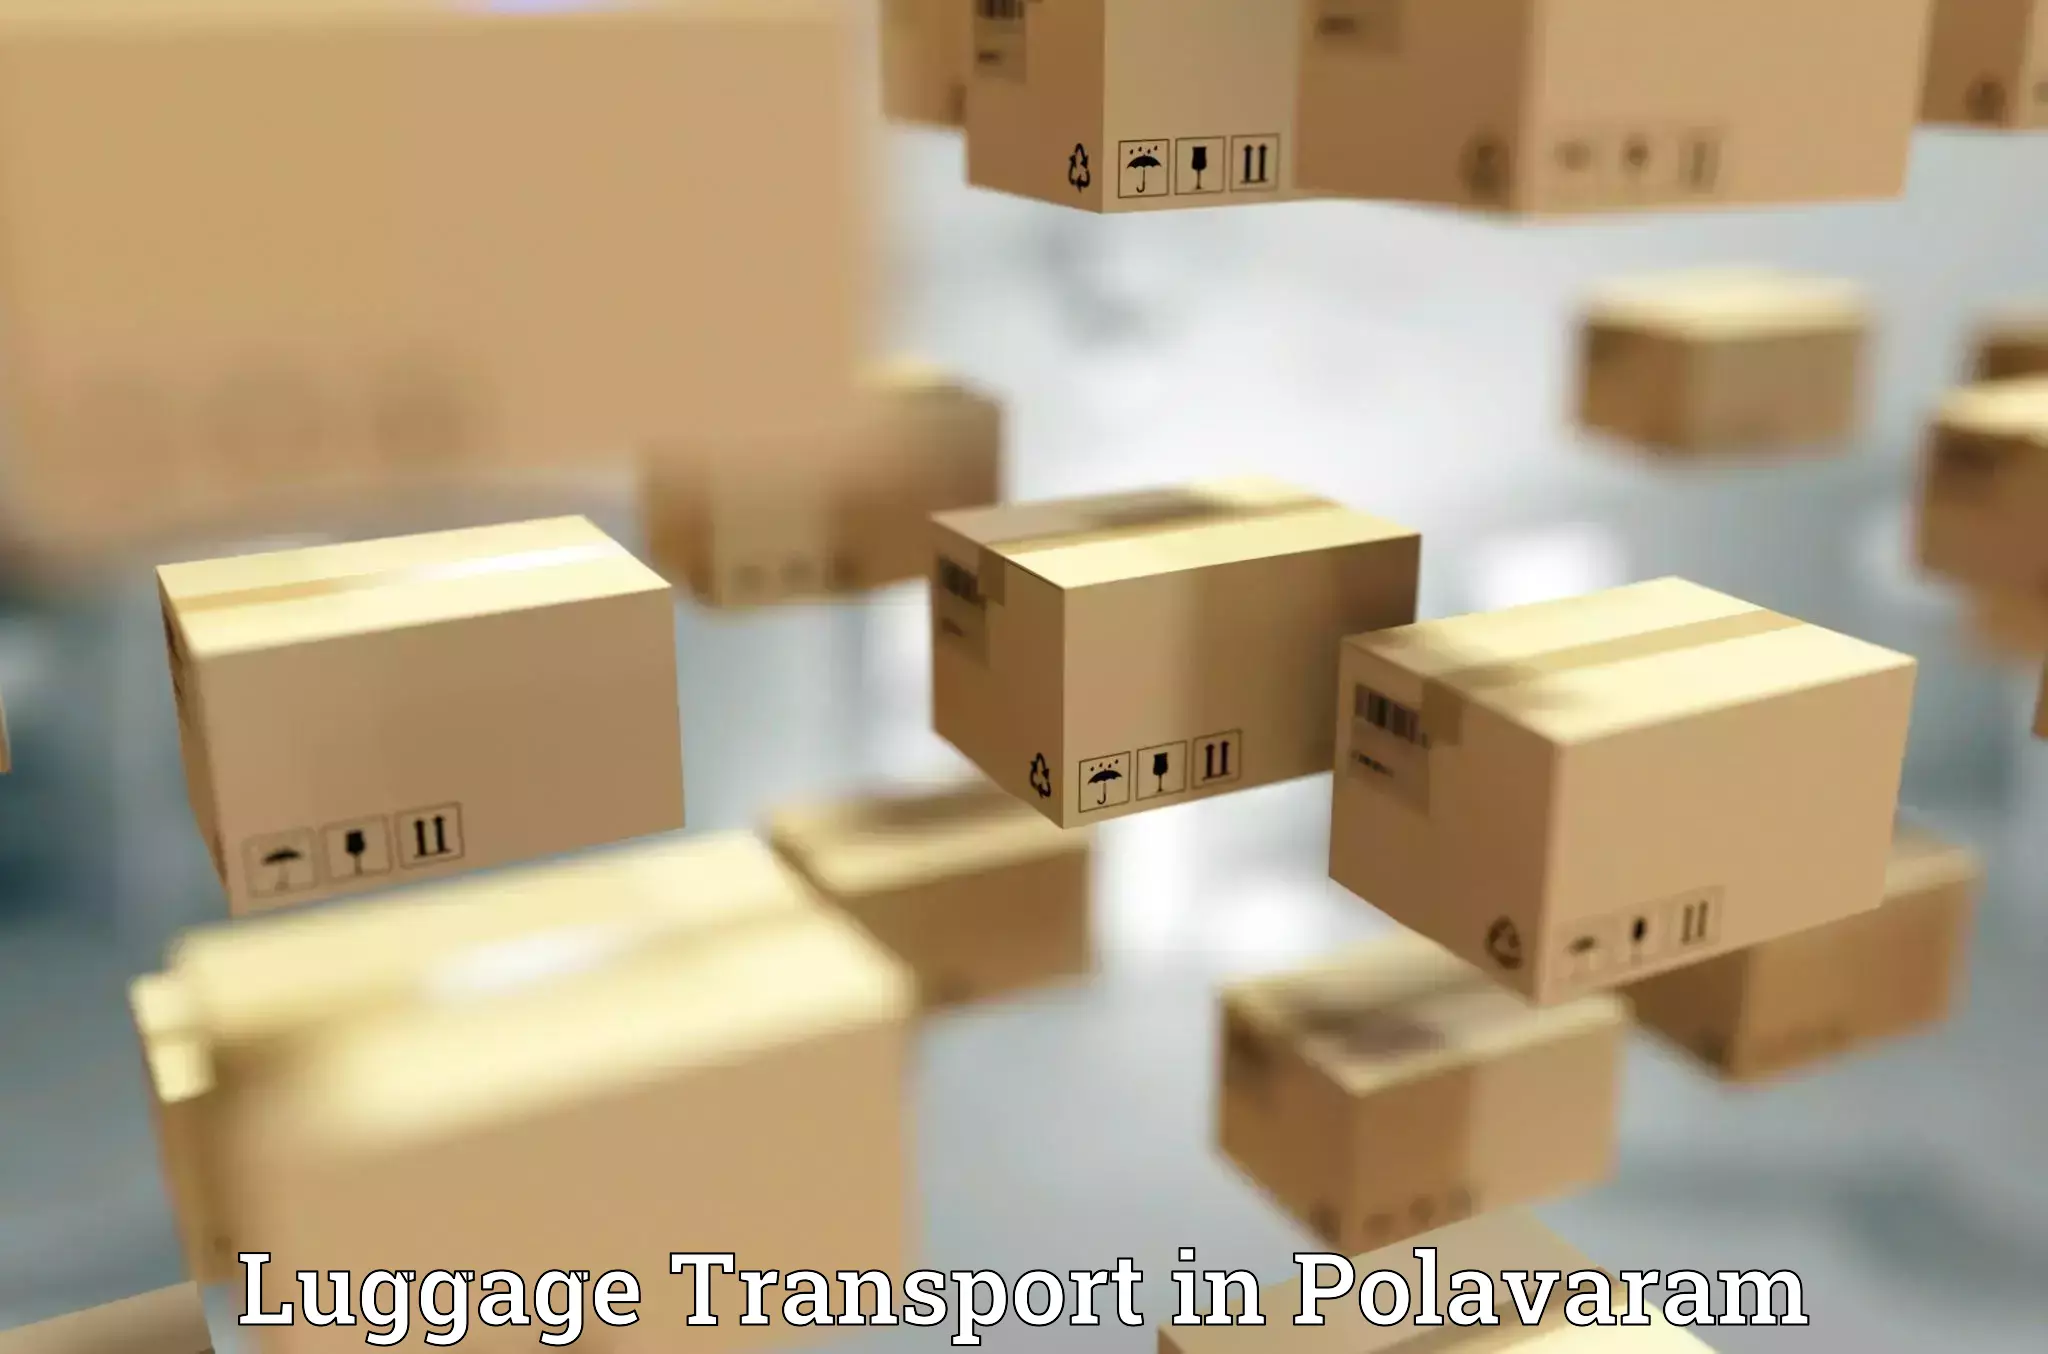 Fast track baggage delivery in Polavaram